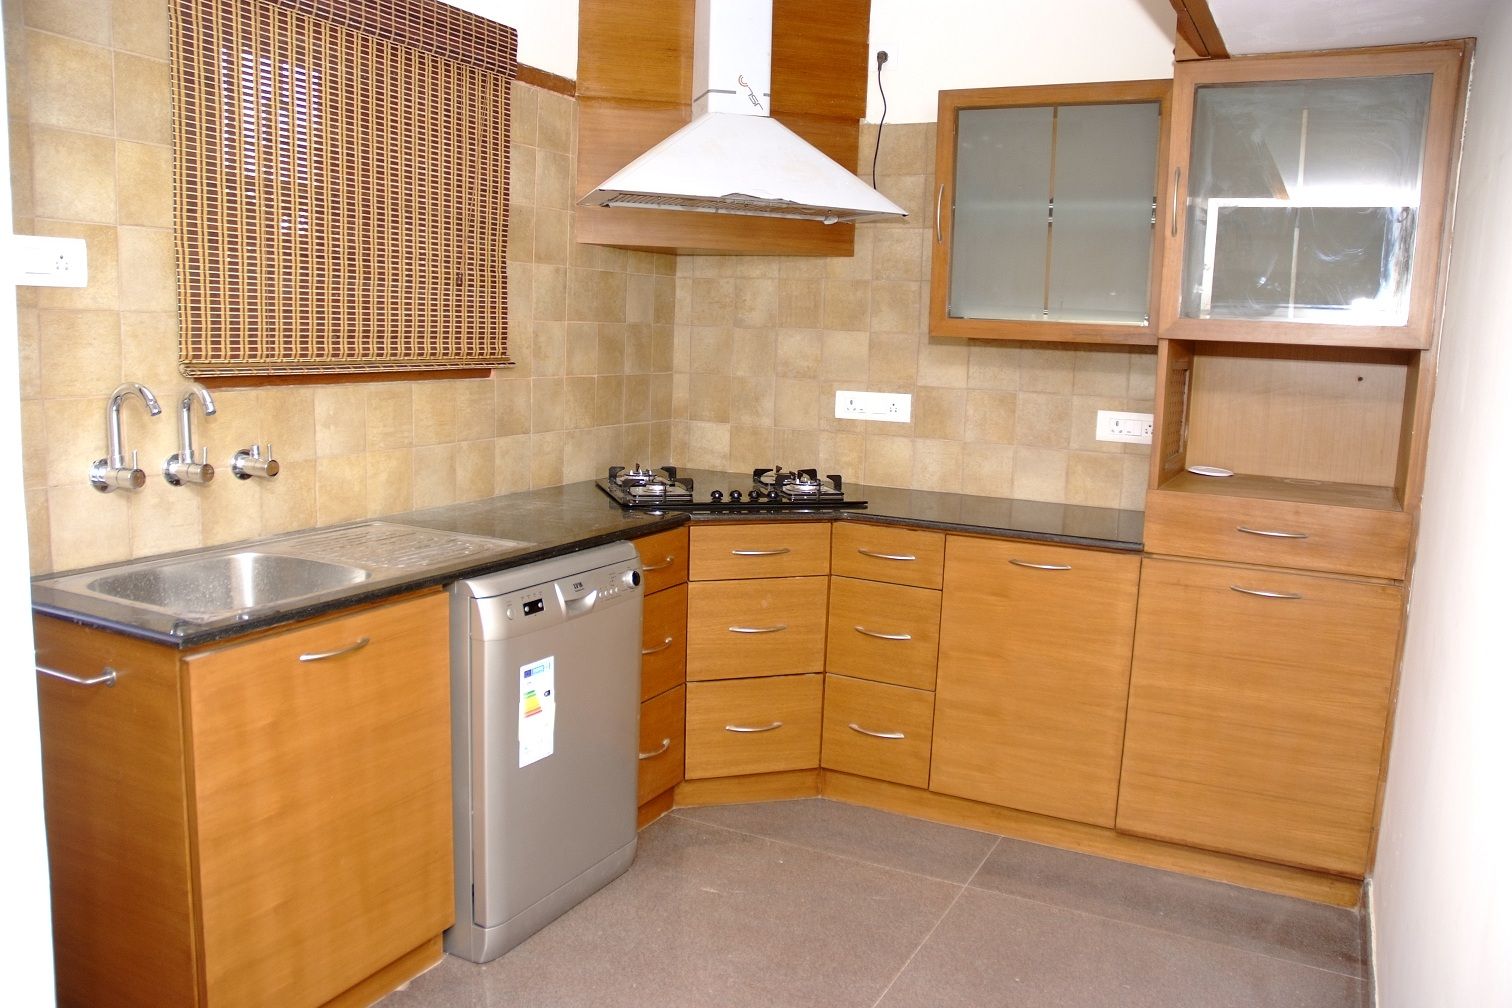 L Shaped Modular Kitchen Designs homify Asian style kitchen Plywood